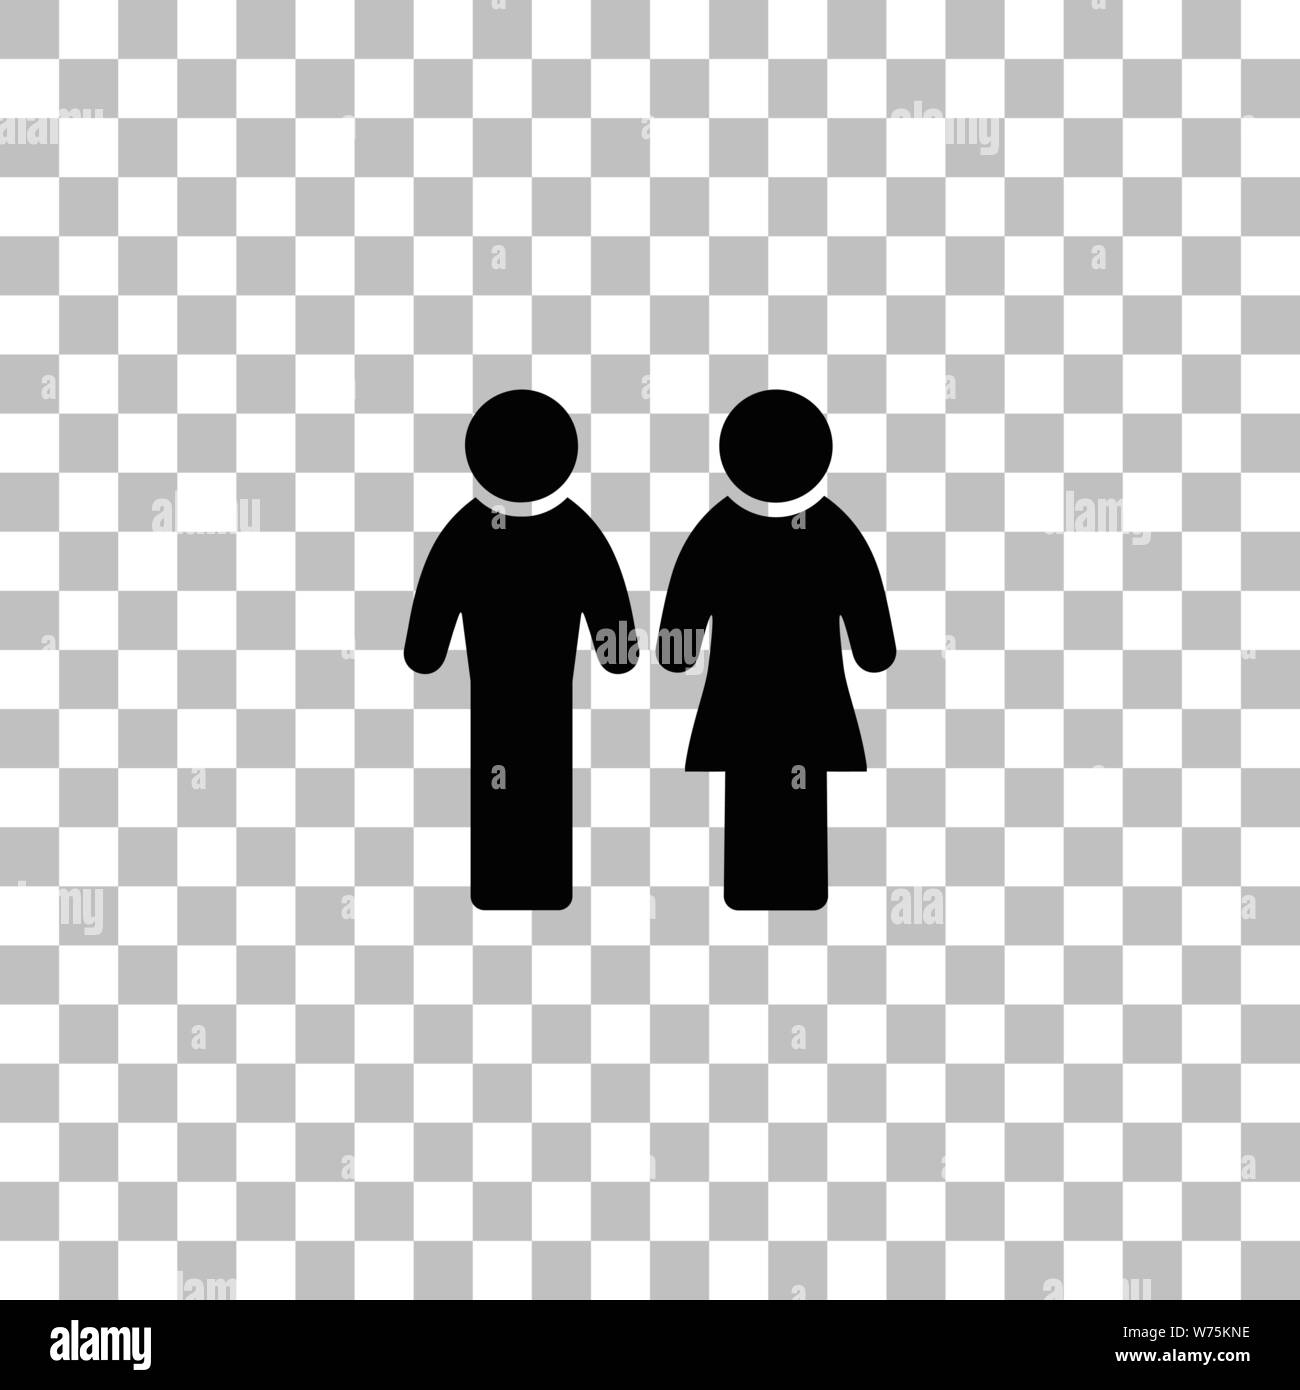 Man and Woman. Black flat icon on a transparent background. Pictogram for your project Stock Vector